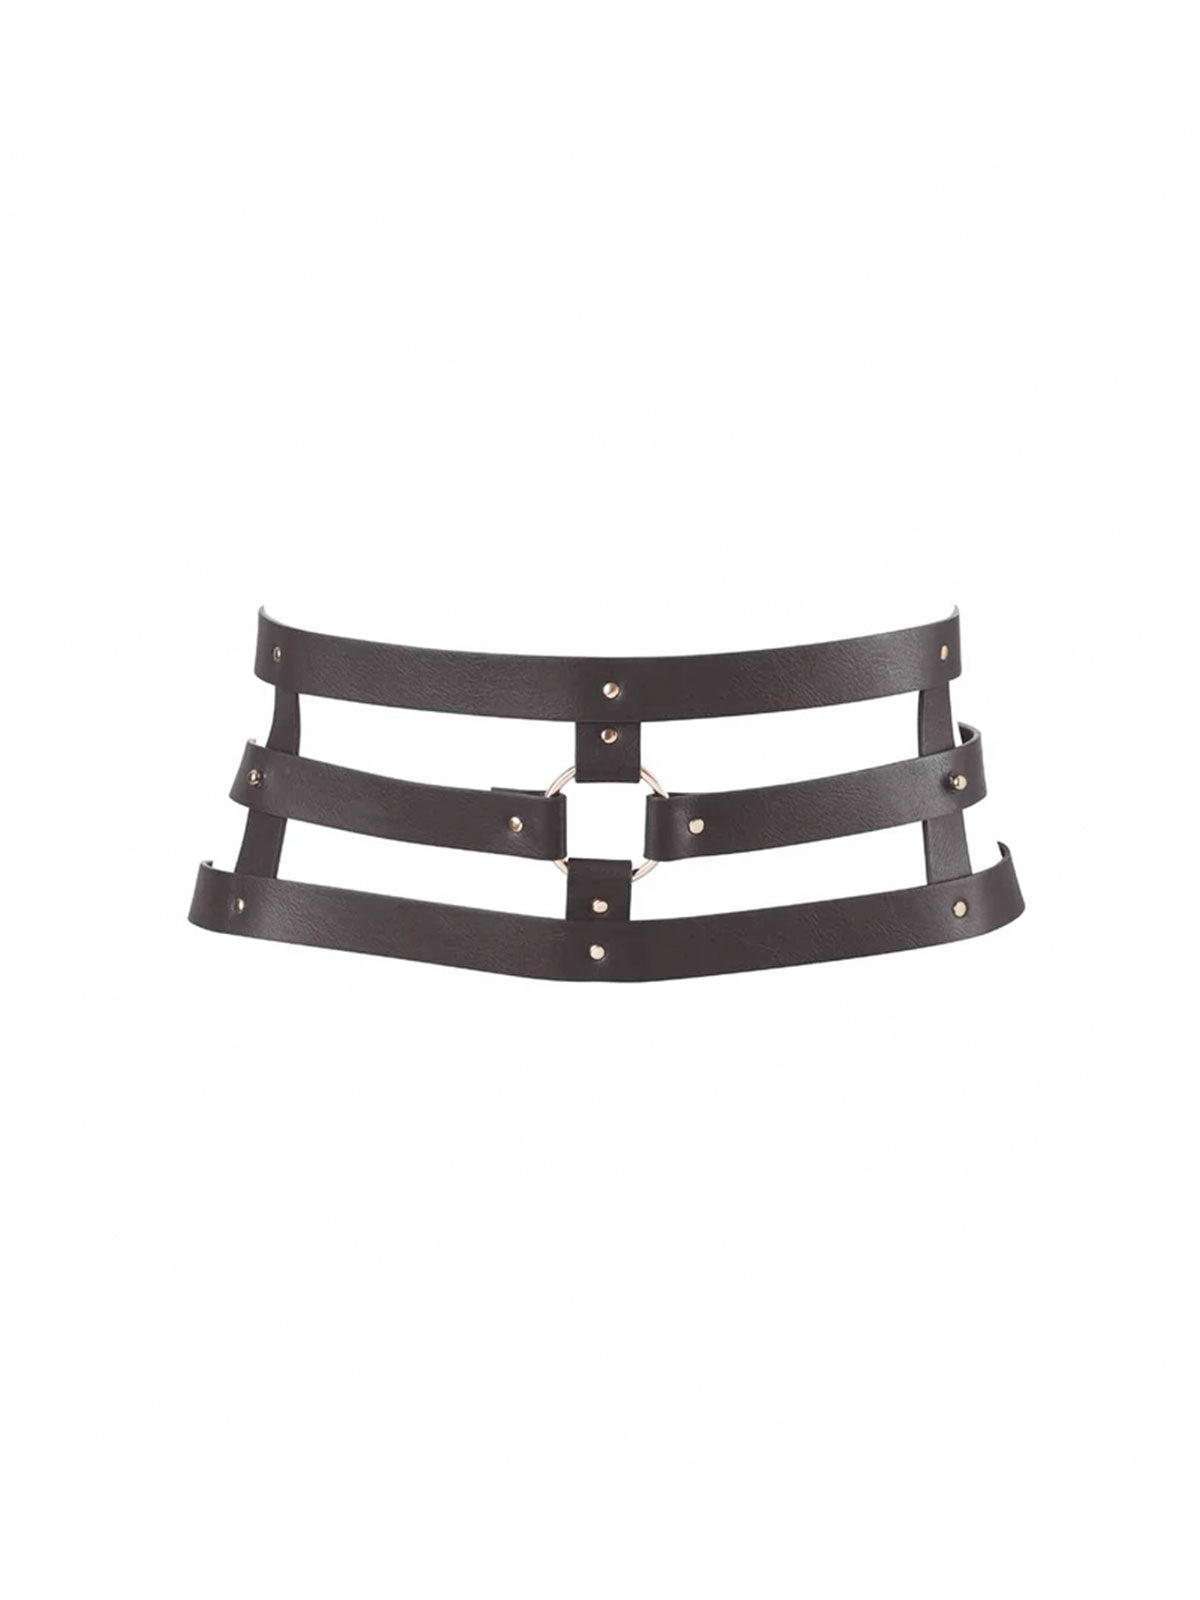 Wide Belt and Cuff Restraints